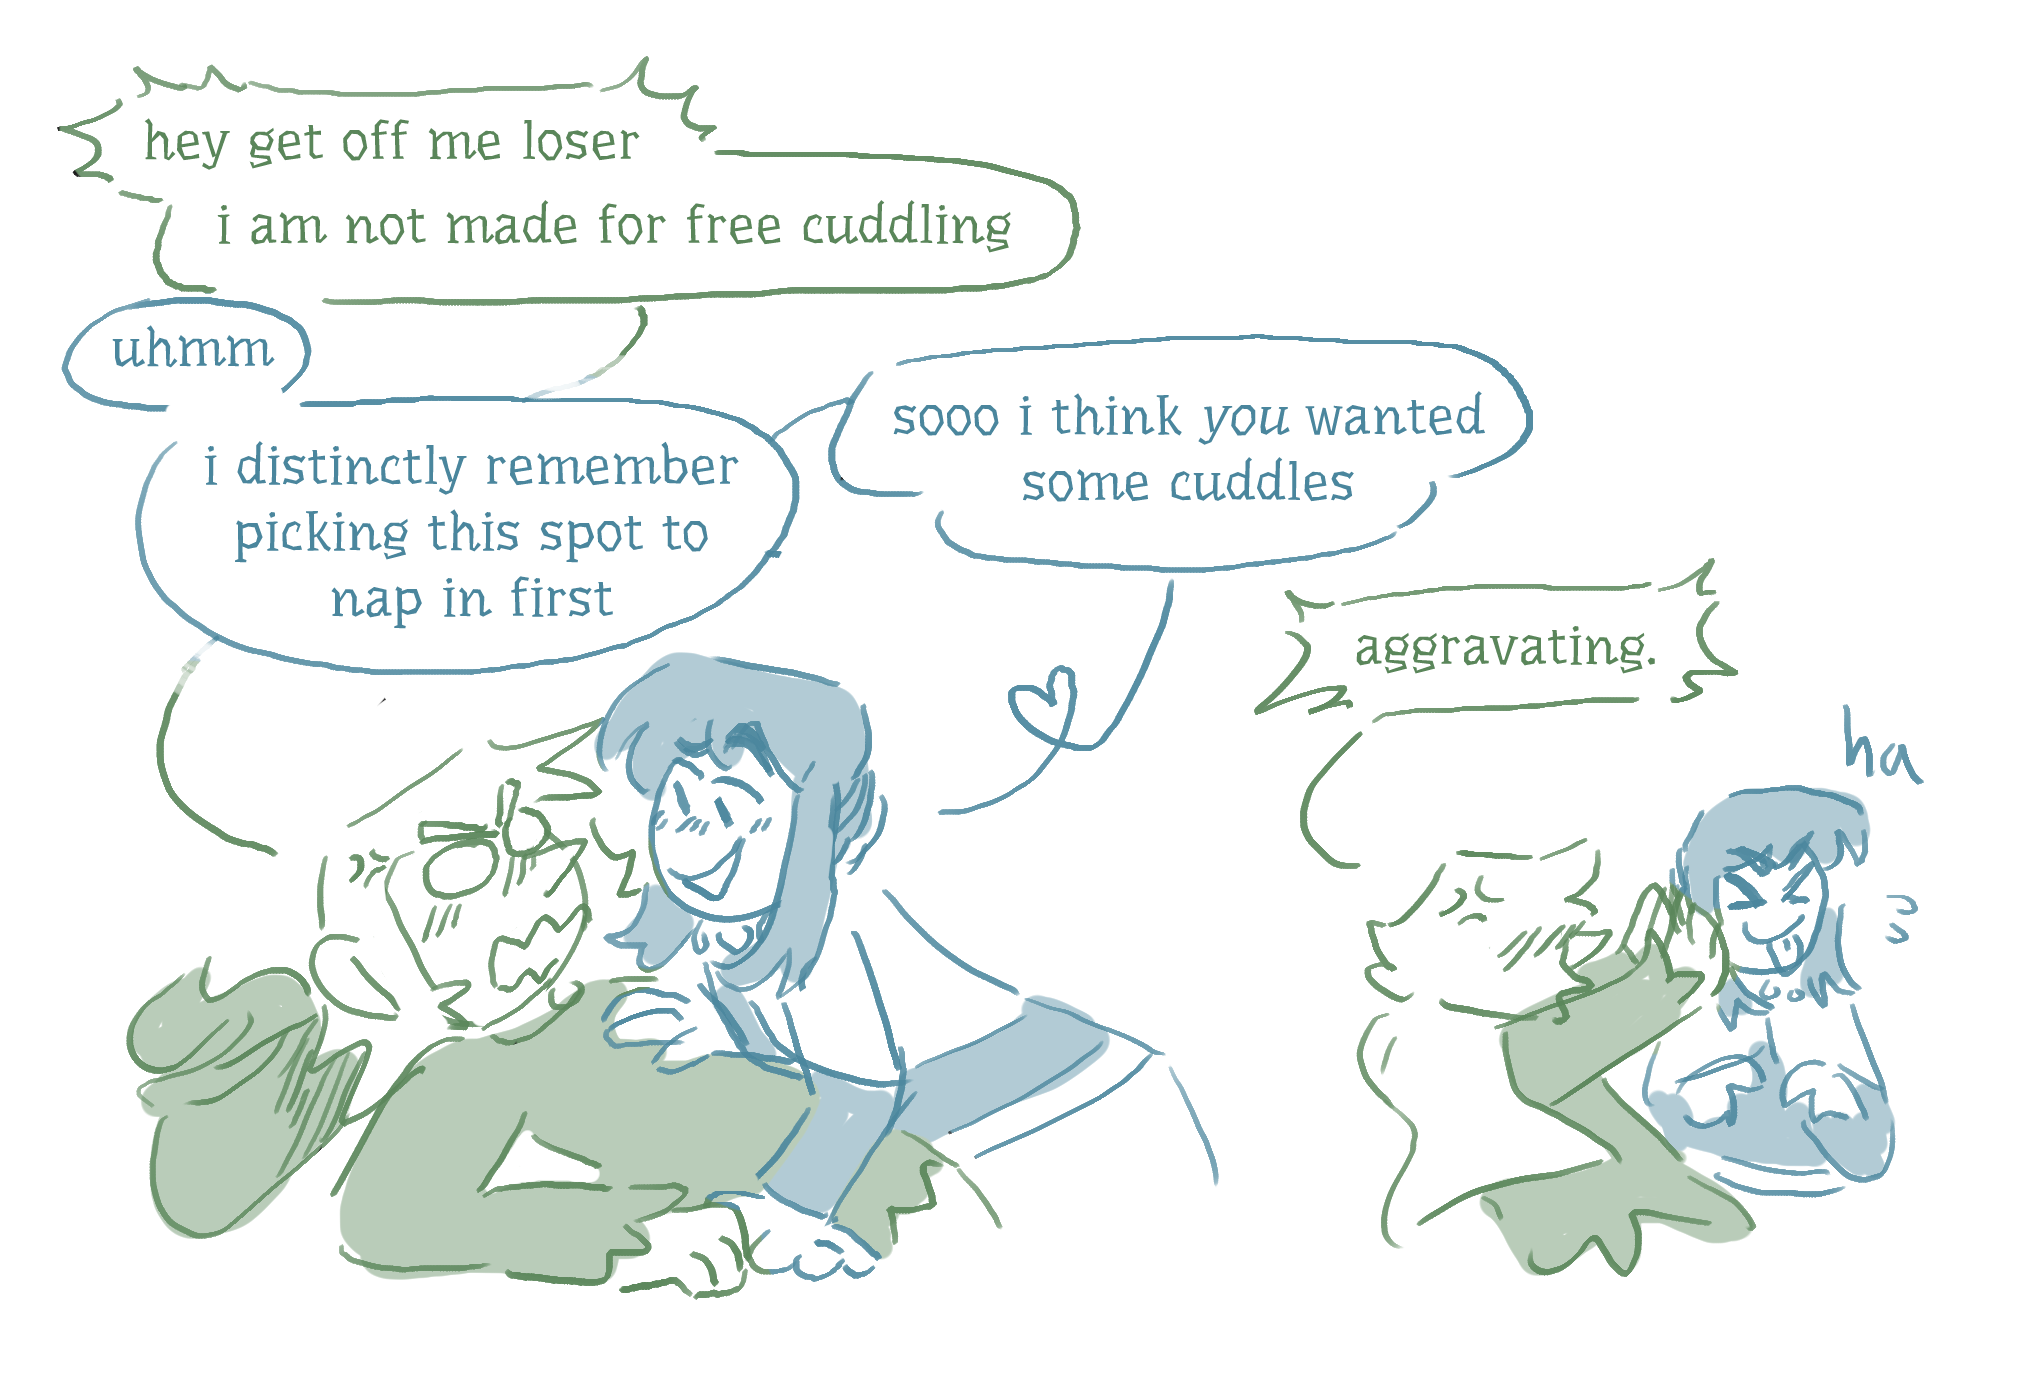 not made for free cuddling